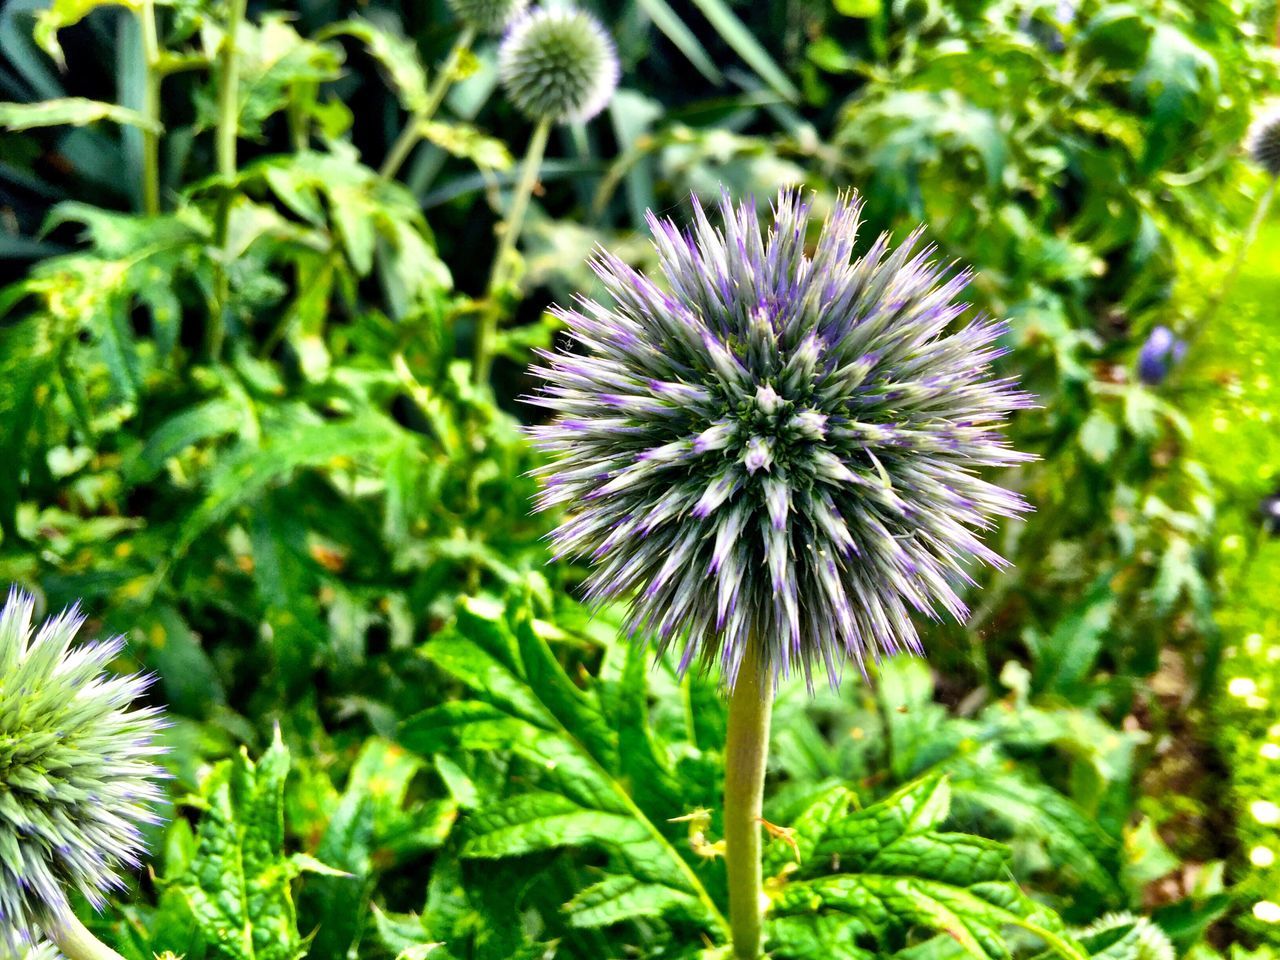 flower, fragility, freshness, growth, flower head, beauty in nature, close-up, plant, stem, purple, springtime, nature, blossom, focus on foreground, petal, single flower, in bloom, botany, day, wildflower, dandelion, uncultivated, green color, softness, outdoors, dandelion seed, thistle, blooming, no people